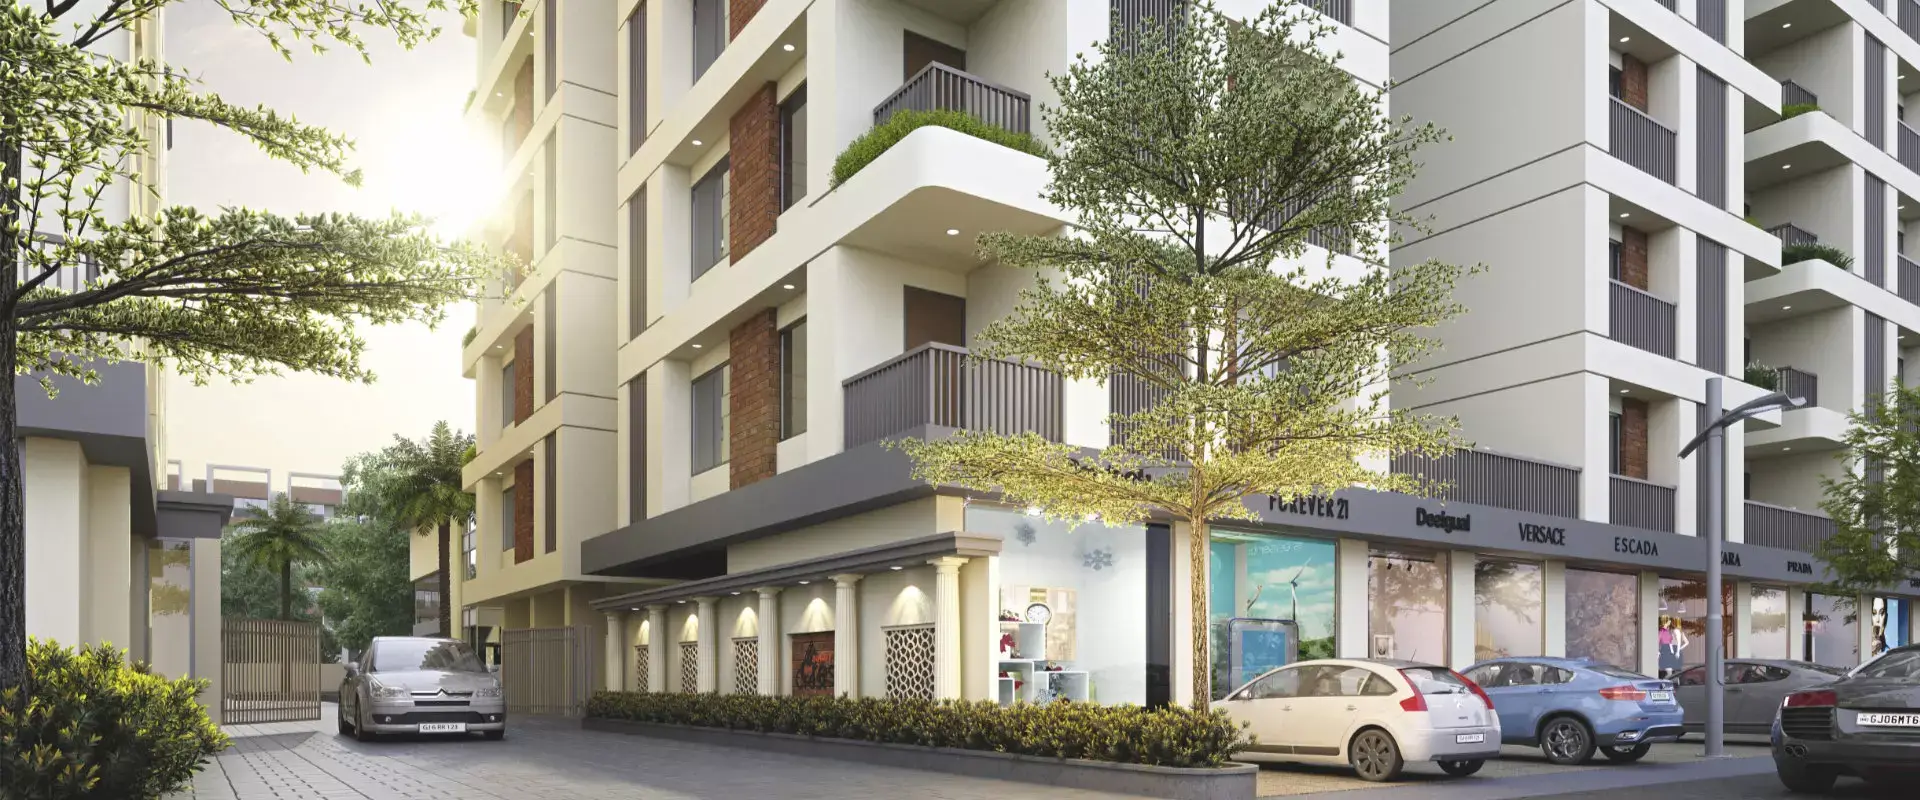 SHOPS & 3 BHK LUXURIOUS APARTMENTS